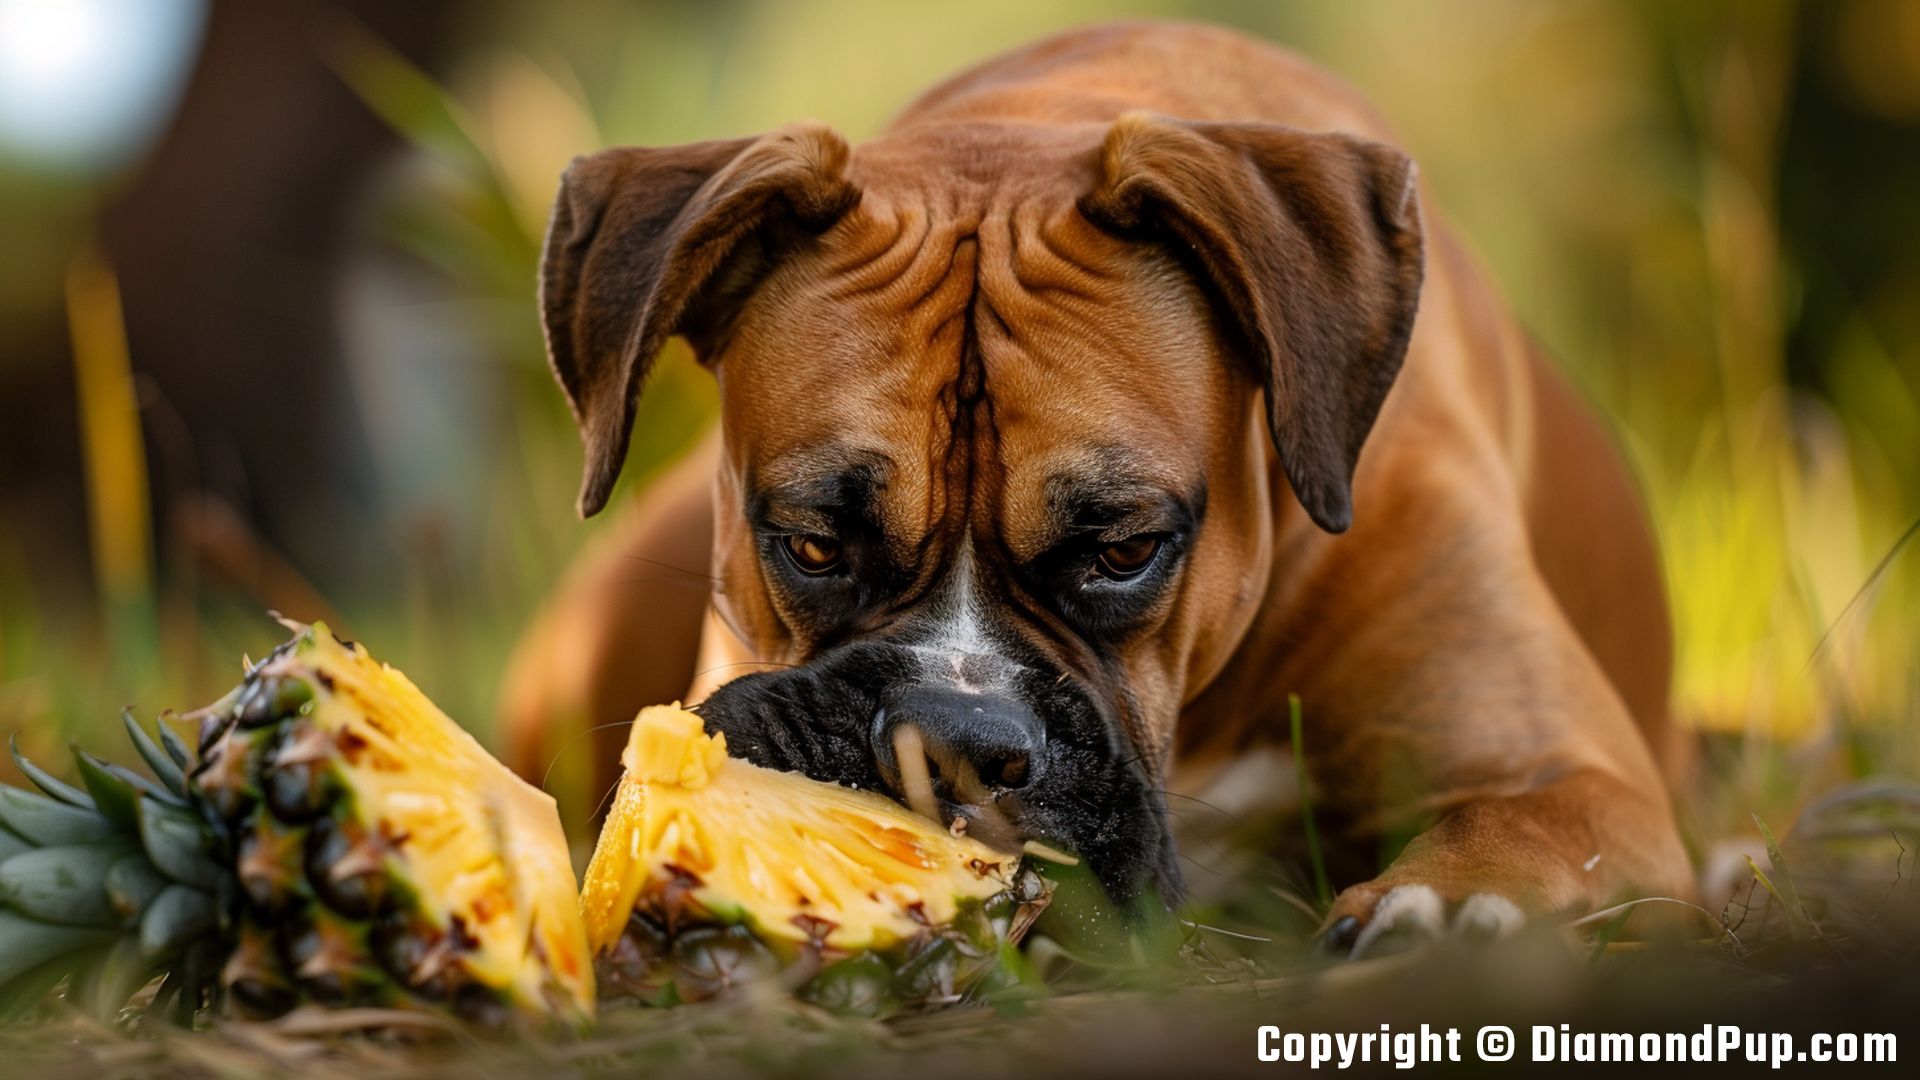 Photograph of a Happy Boxer Eating Pineapple